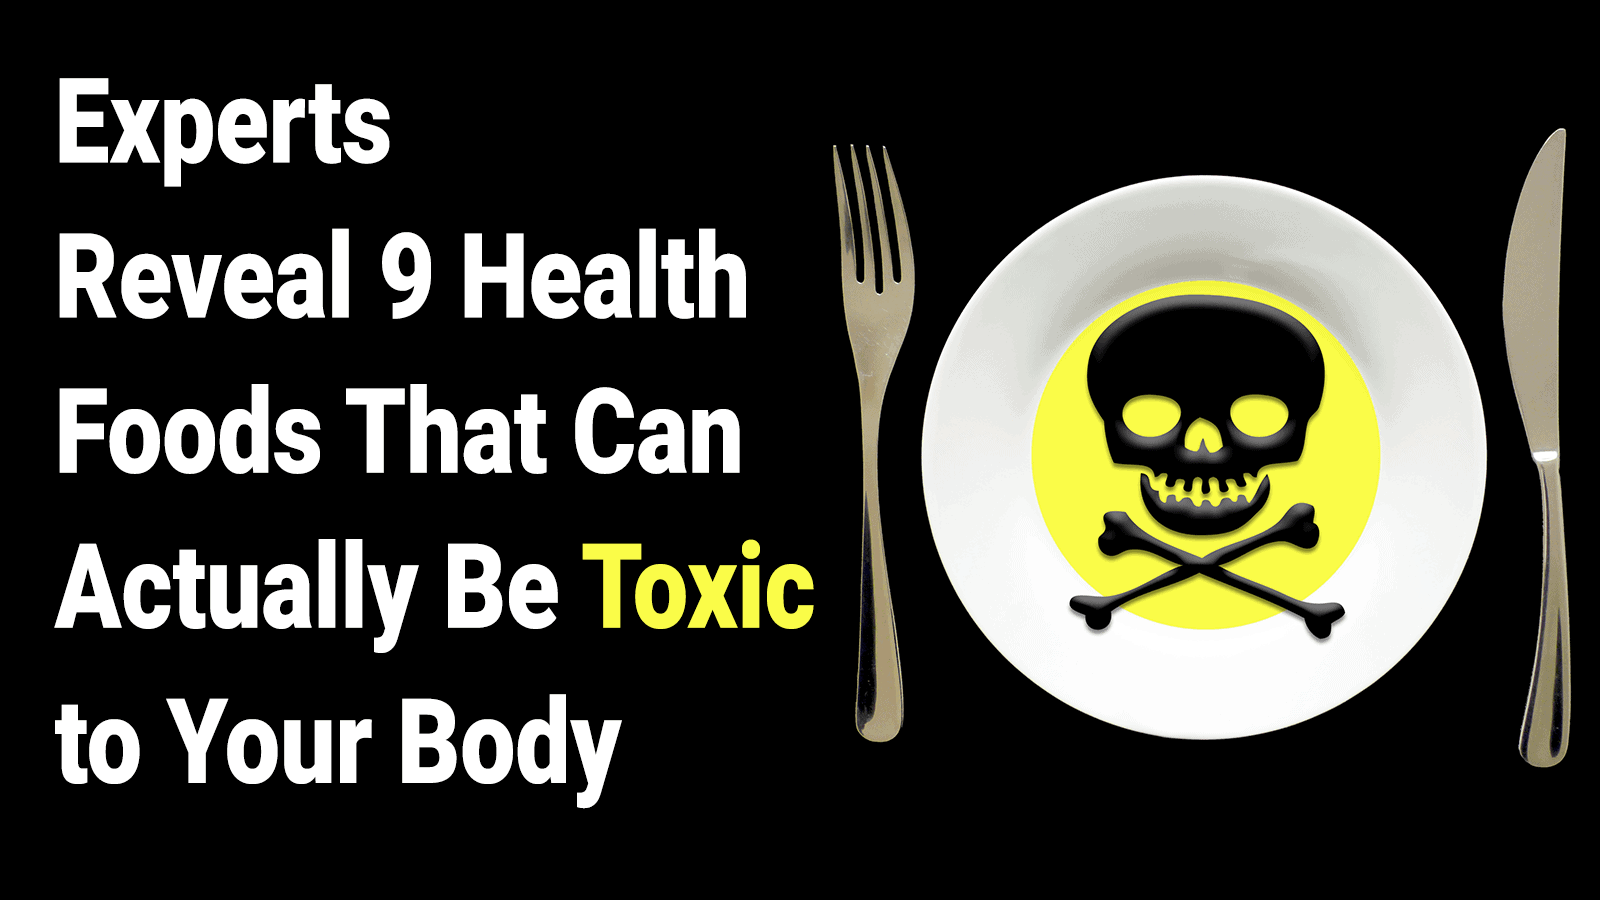 Experts Reveal 9 Unexpected Health Foods to Avoid That May Be Toxic to Your Body